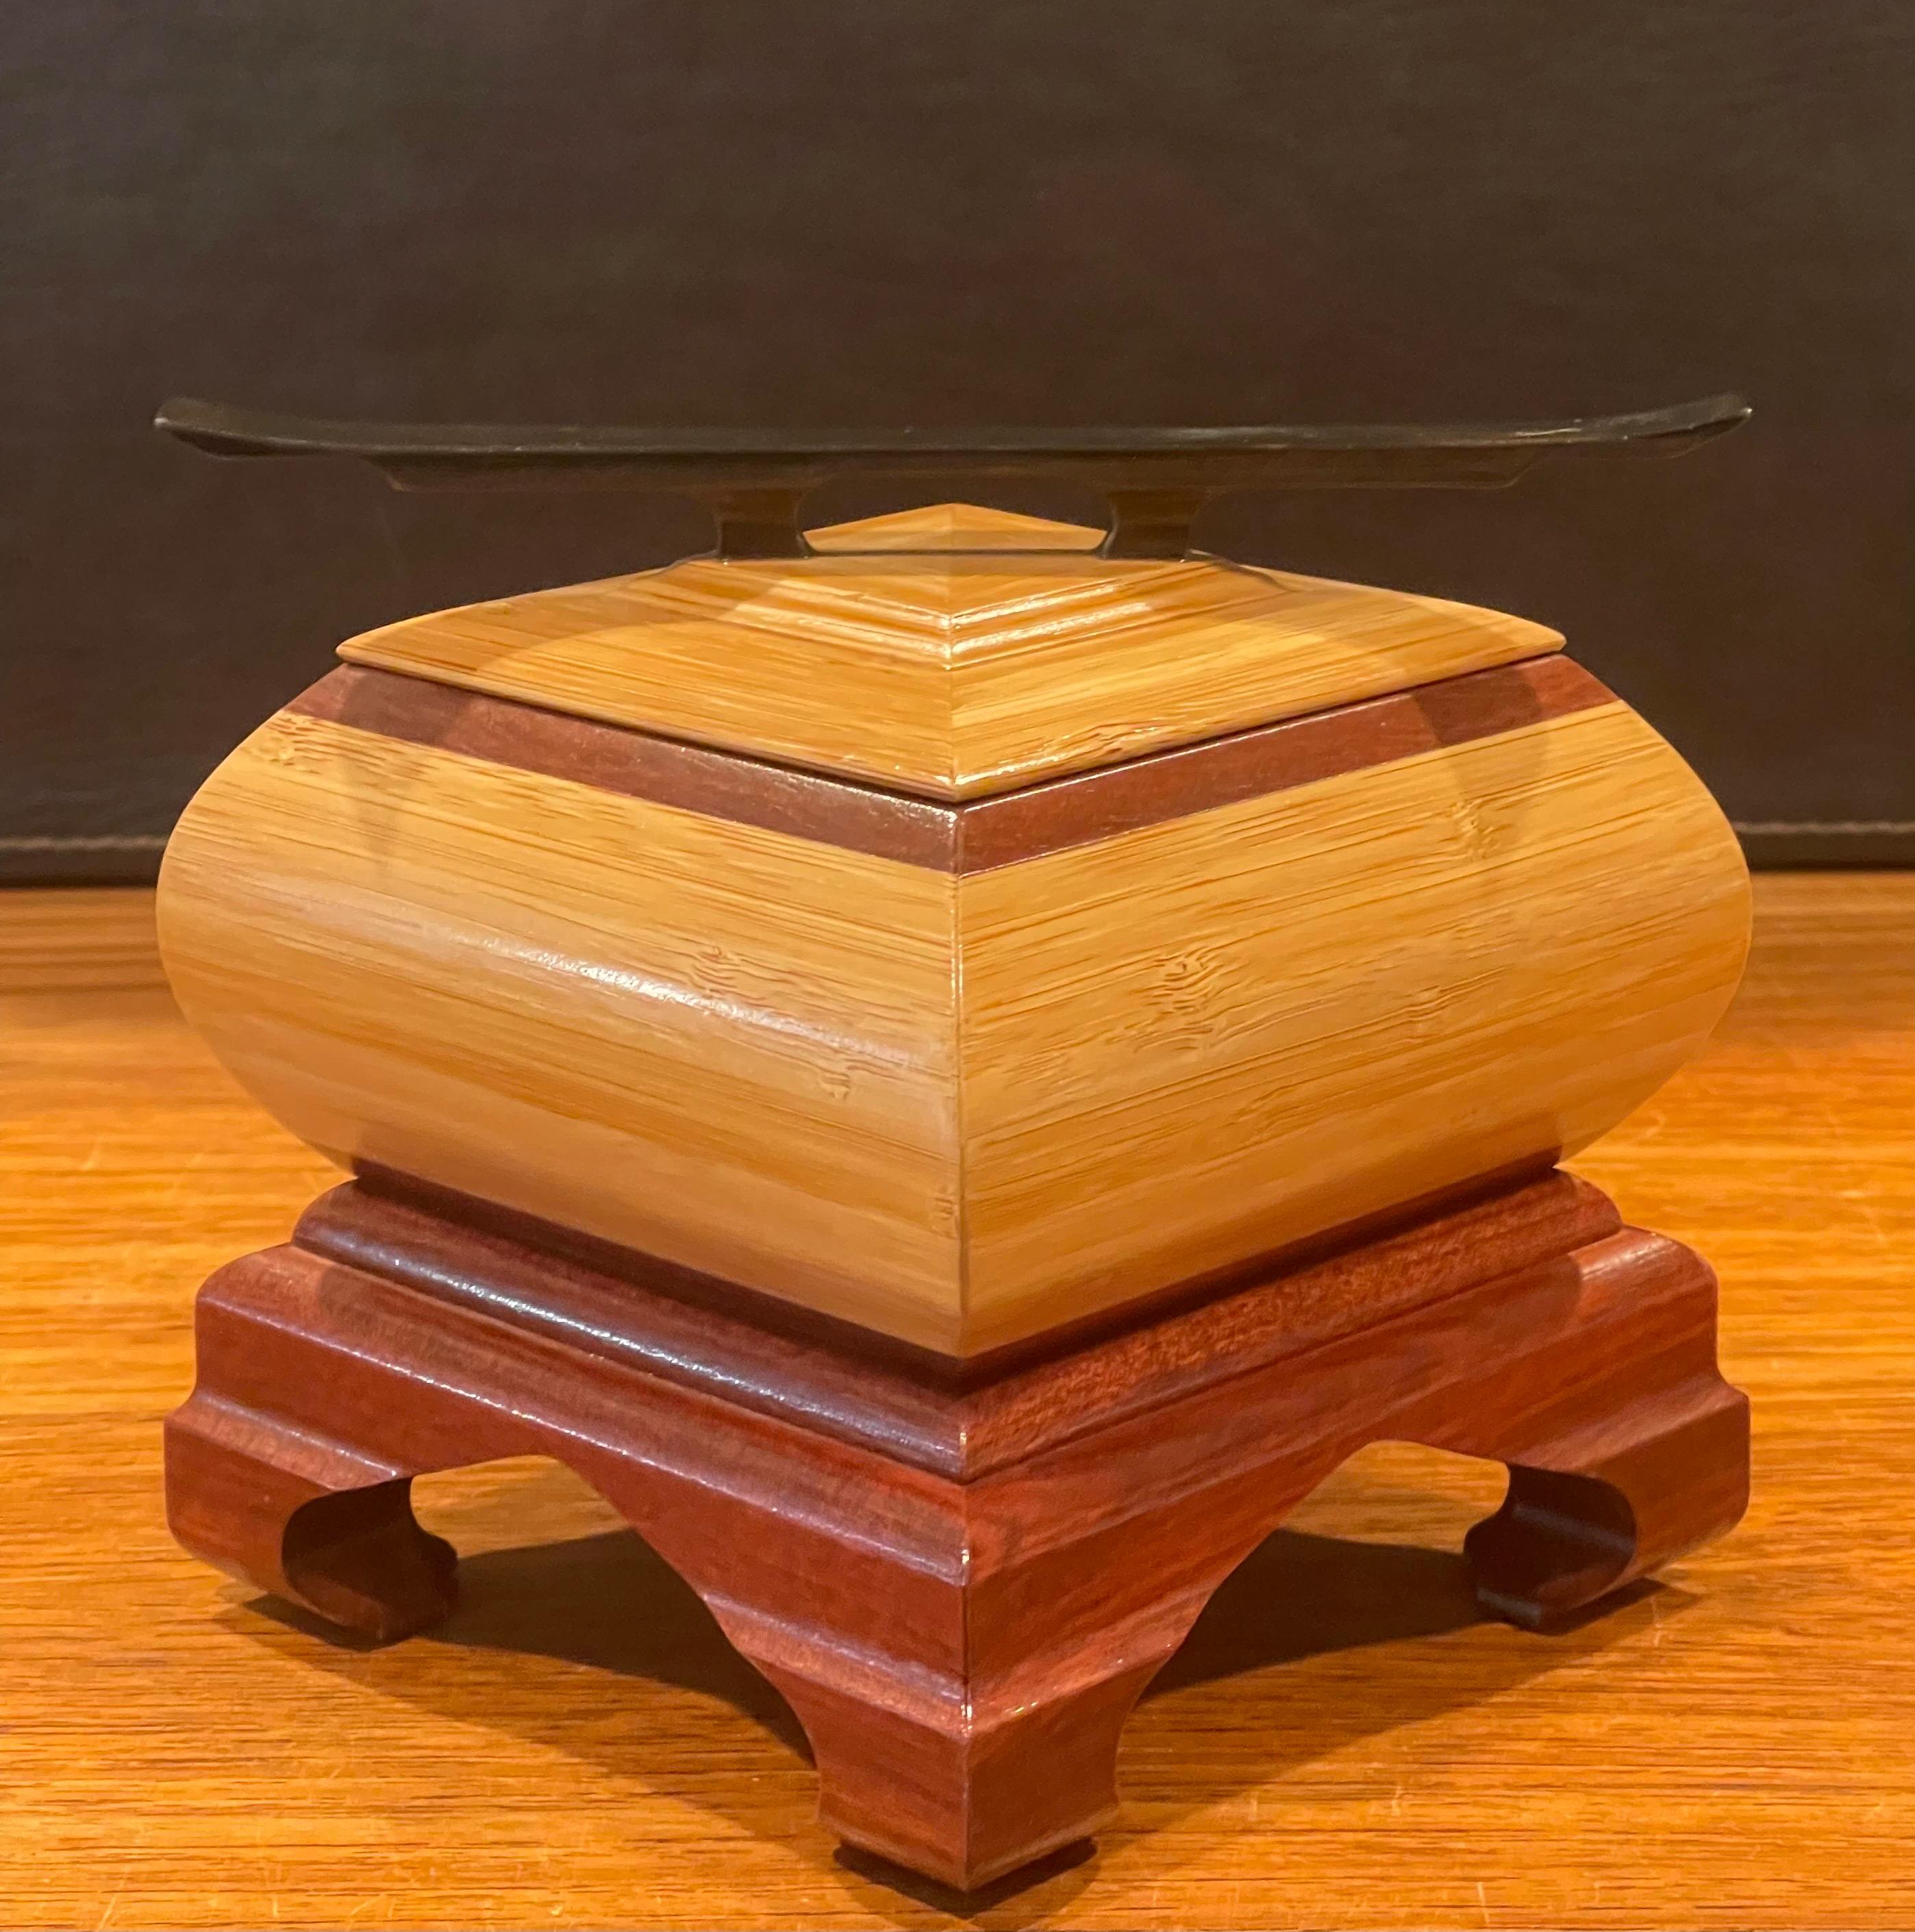 A unique post-modern mixed woods jewelry box handcrafted and signed by the artist, circa 2006. The box is a mix of mahogany, oak, cherry and ebony woods. Elegant design and styling.  
The box is in very good condition and measures 6